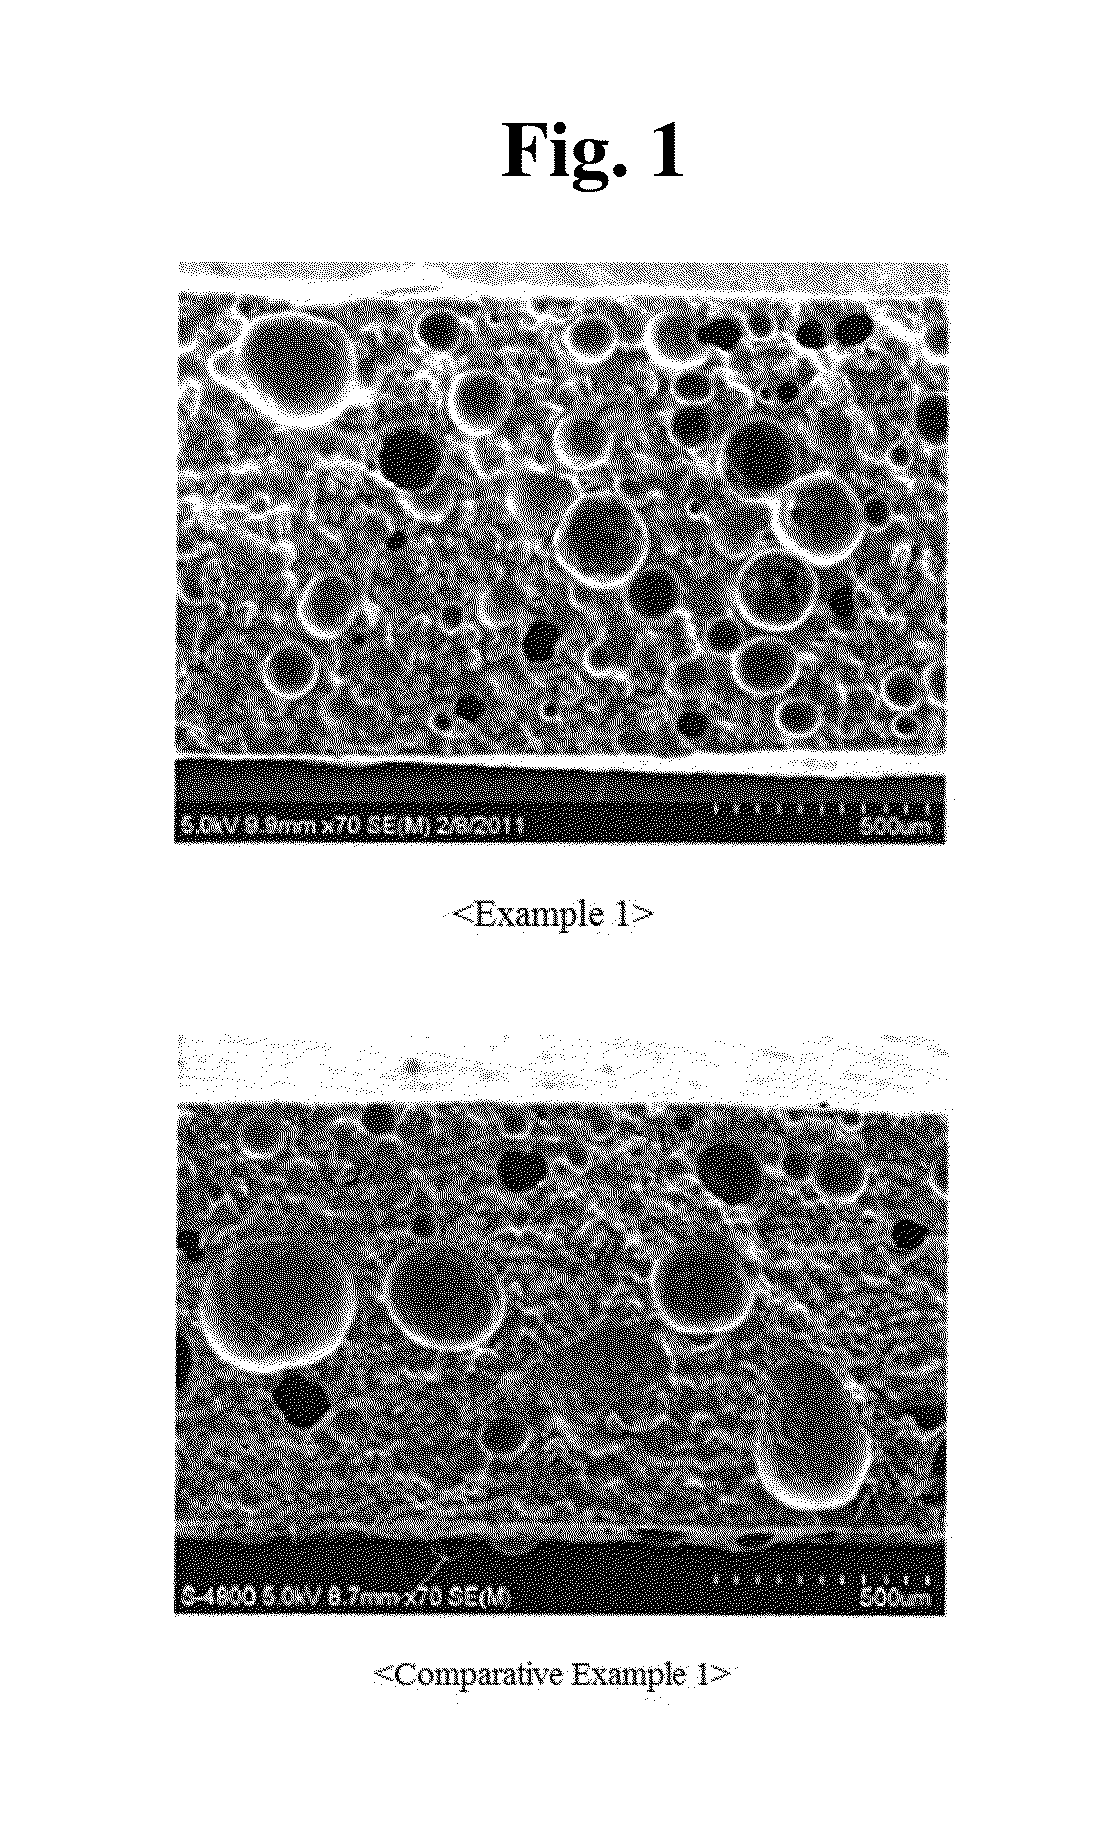 Flame retardant adhesive agent composition having improved gas bubble stability, and method for preparing same